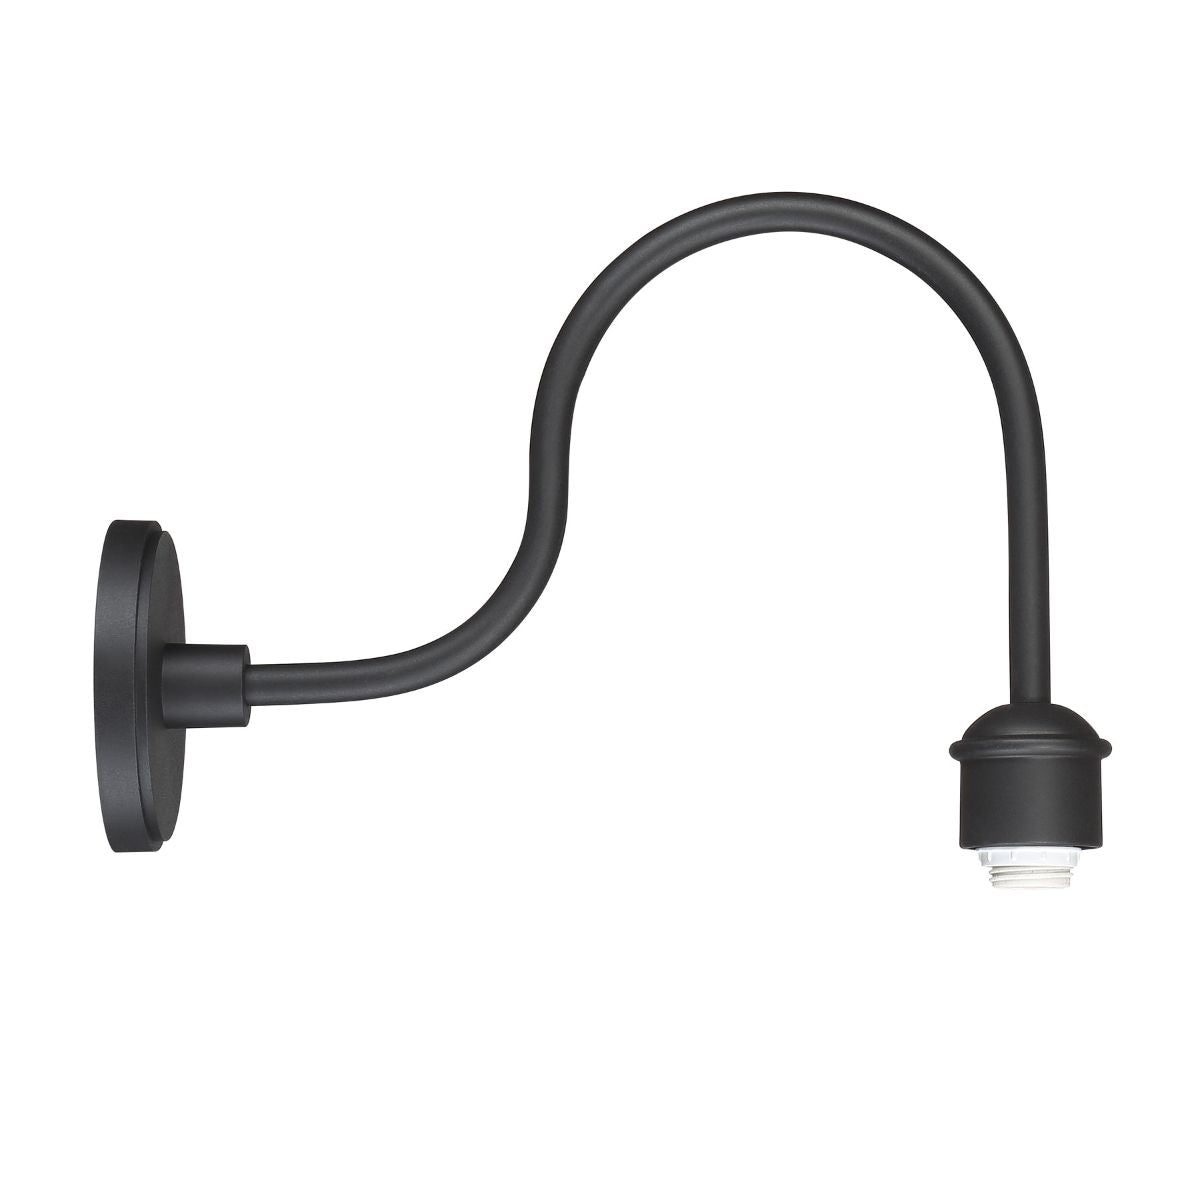 RLM Outdoor Wall Mount 18 In. Full Curved Arm Black Finish